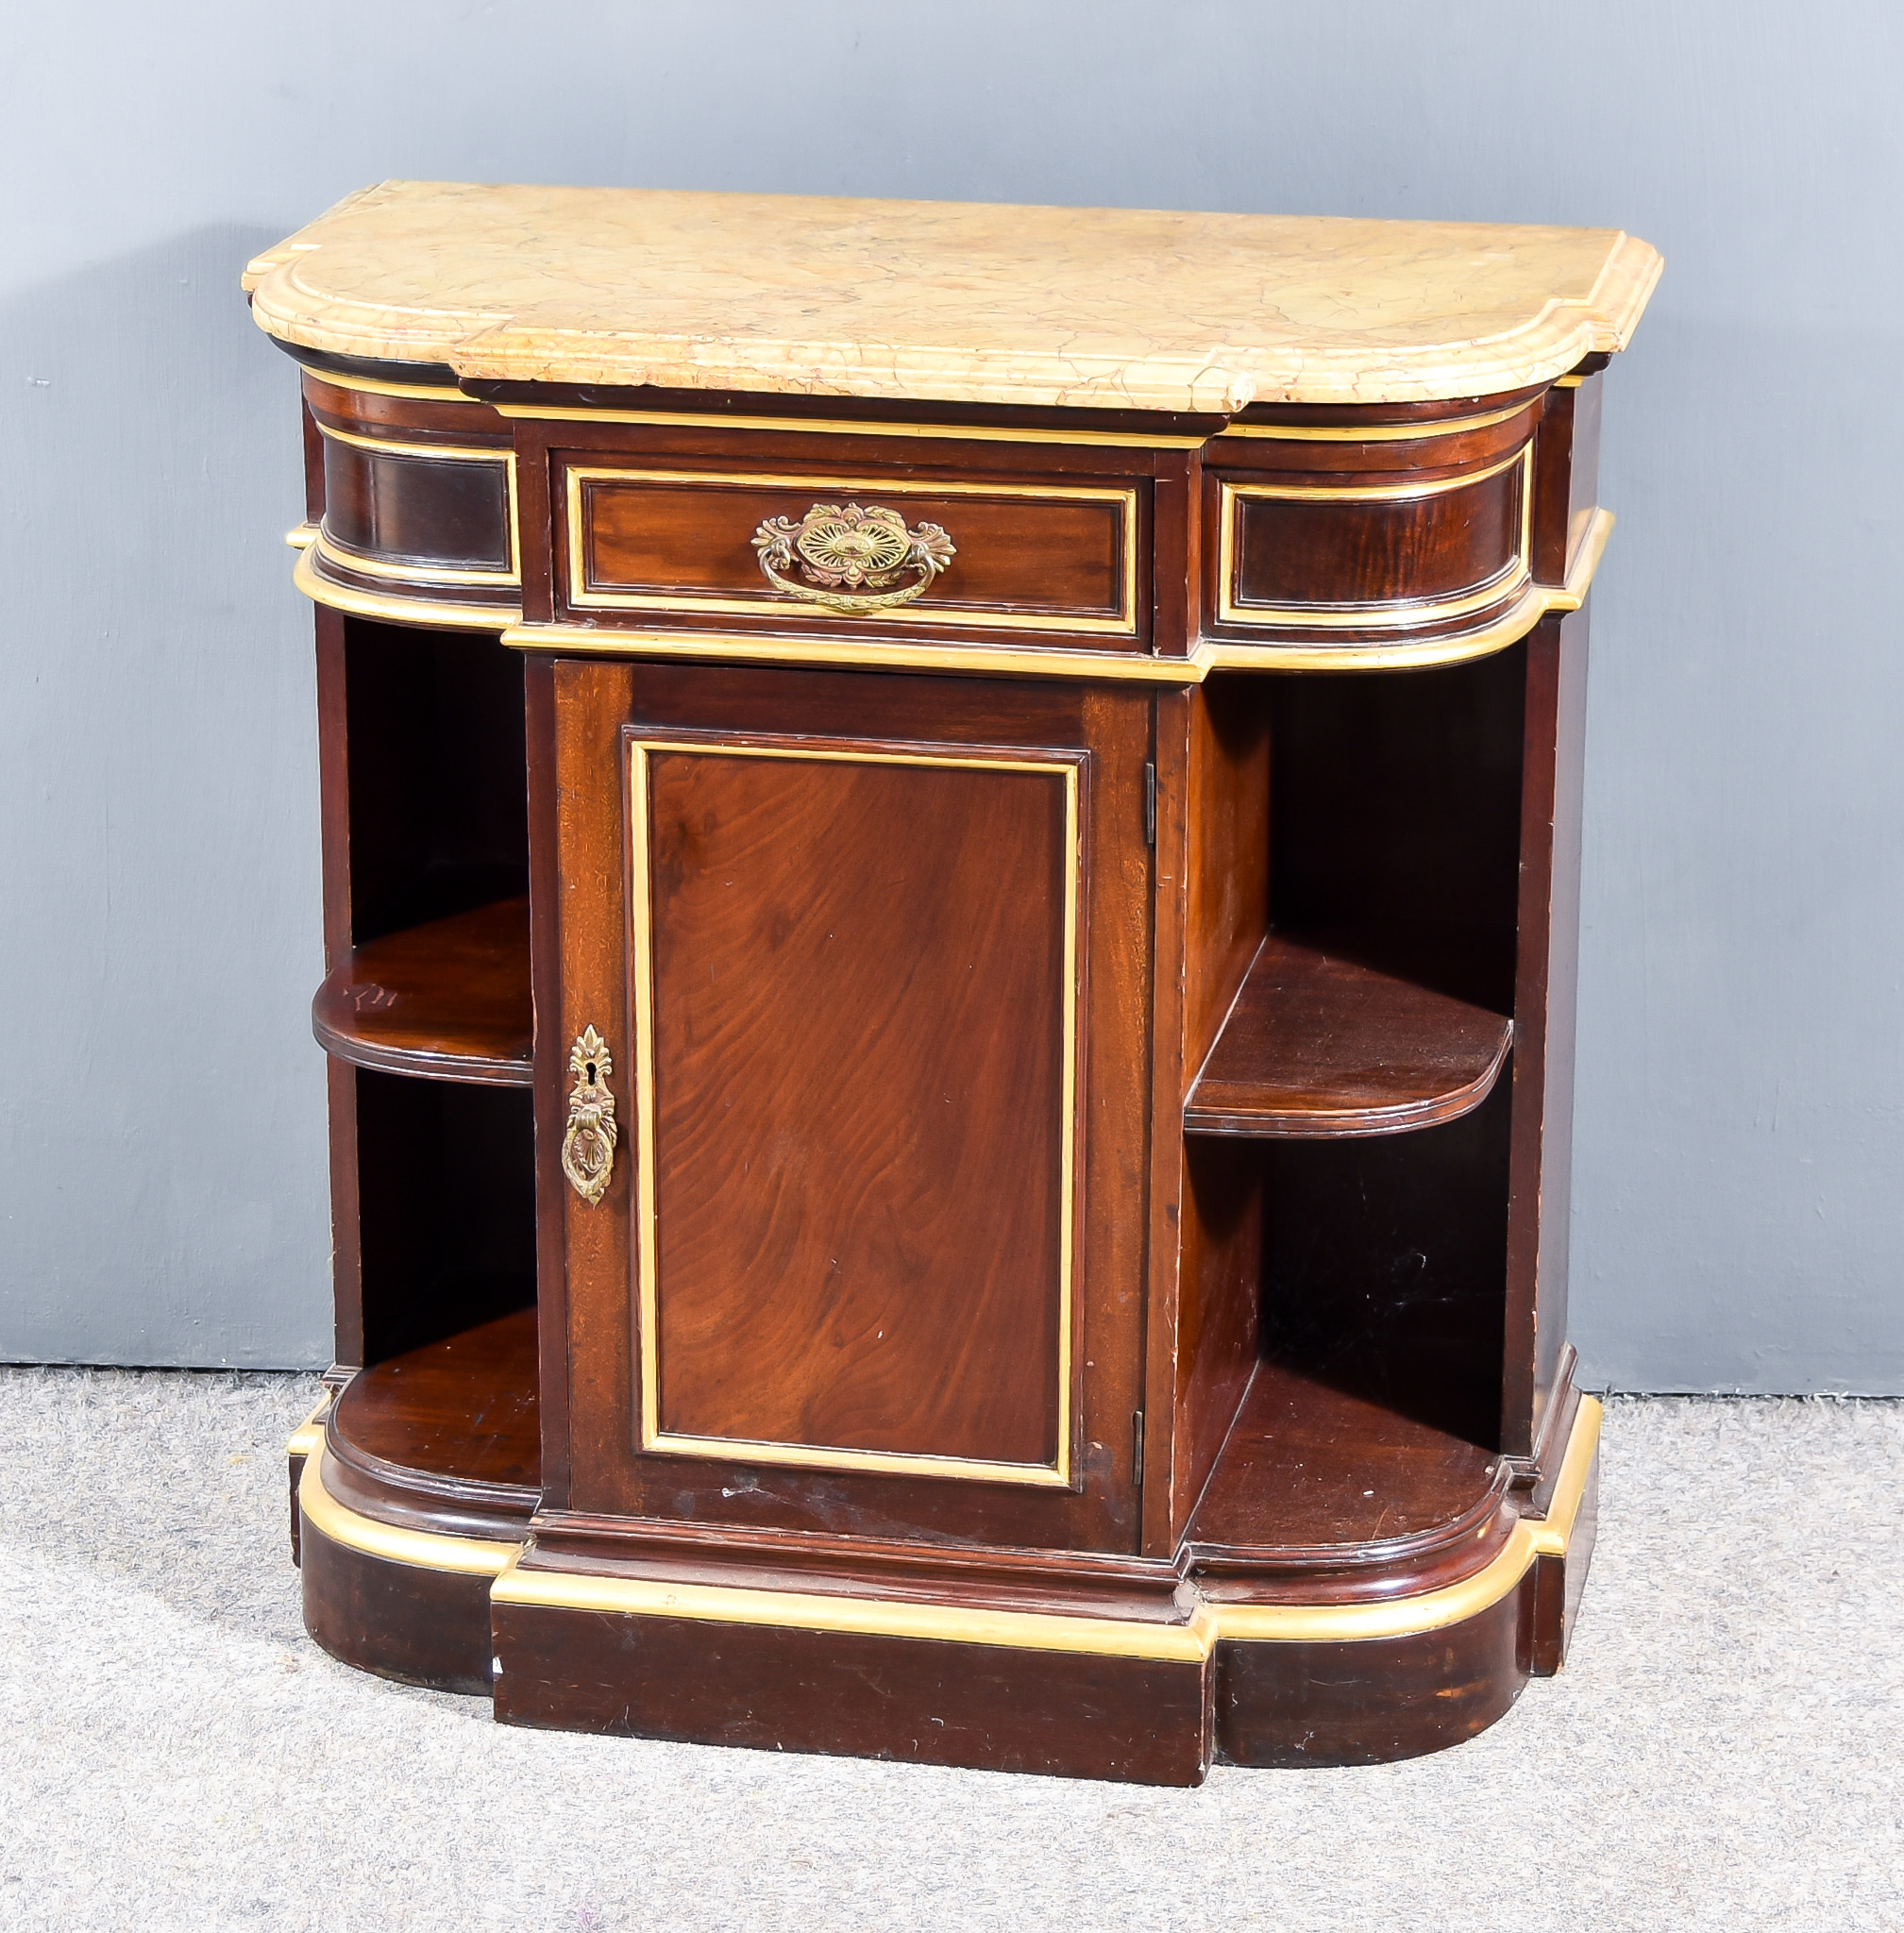 A 20th Century Mahogany and Parcel Gilt Break Front Dwarf Cabinet, with yellow flecked marble top